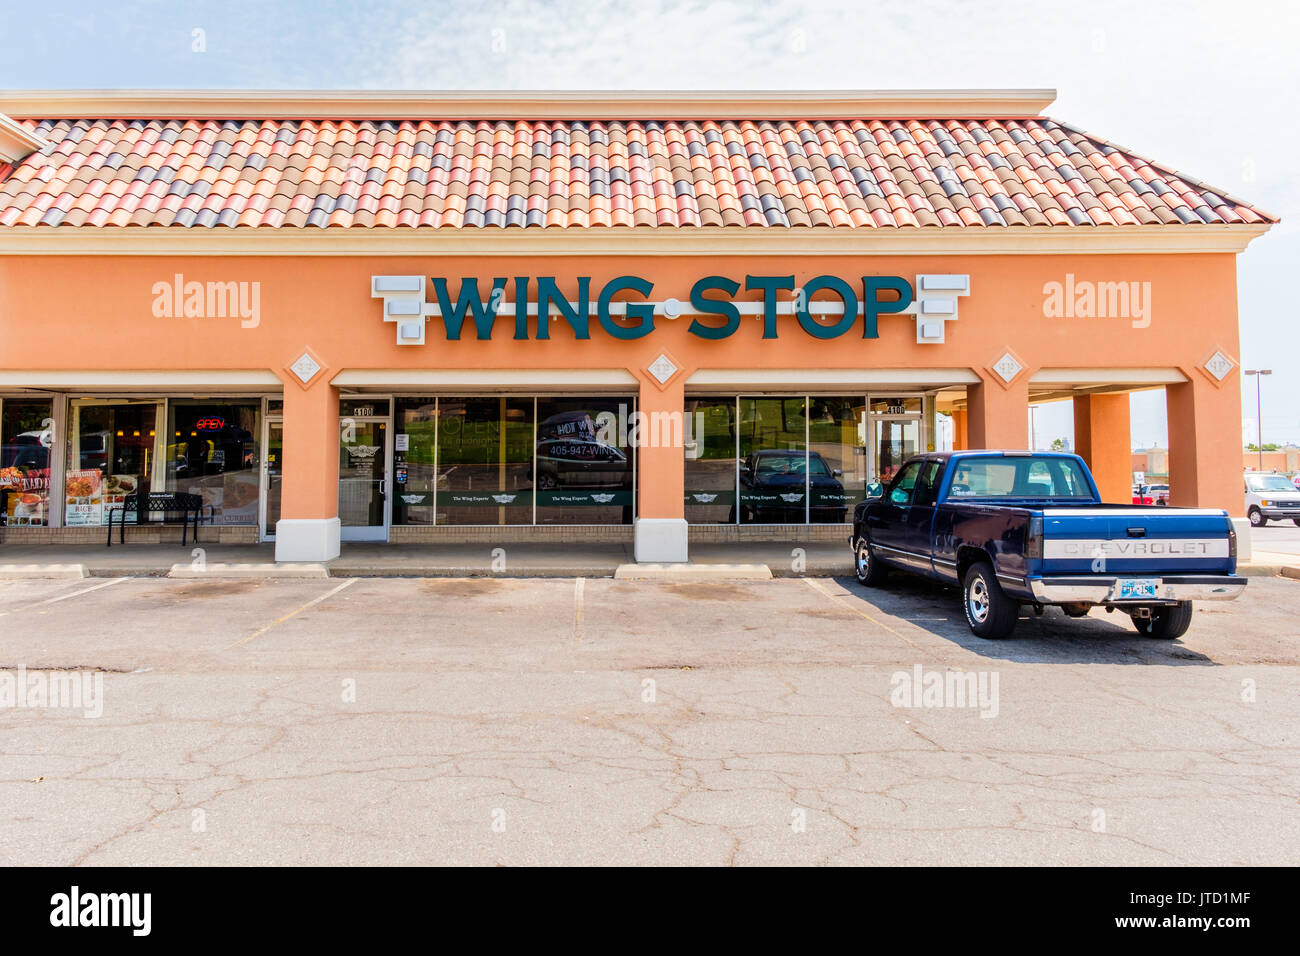 Wing Stop exterior, a business in a strip mall selling delicious chicken wings in many different seasonings in Oklahoma City, Oklahoma, USA. Stock Photo